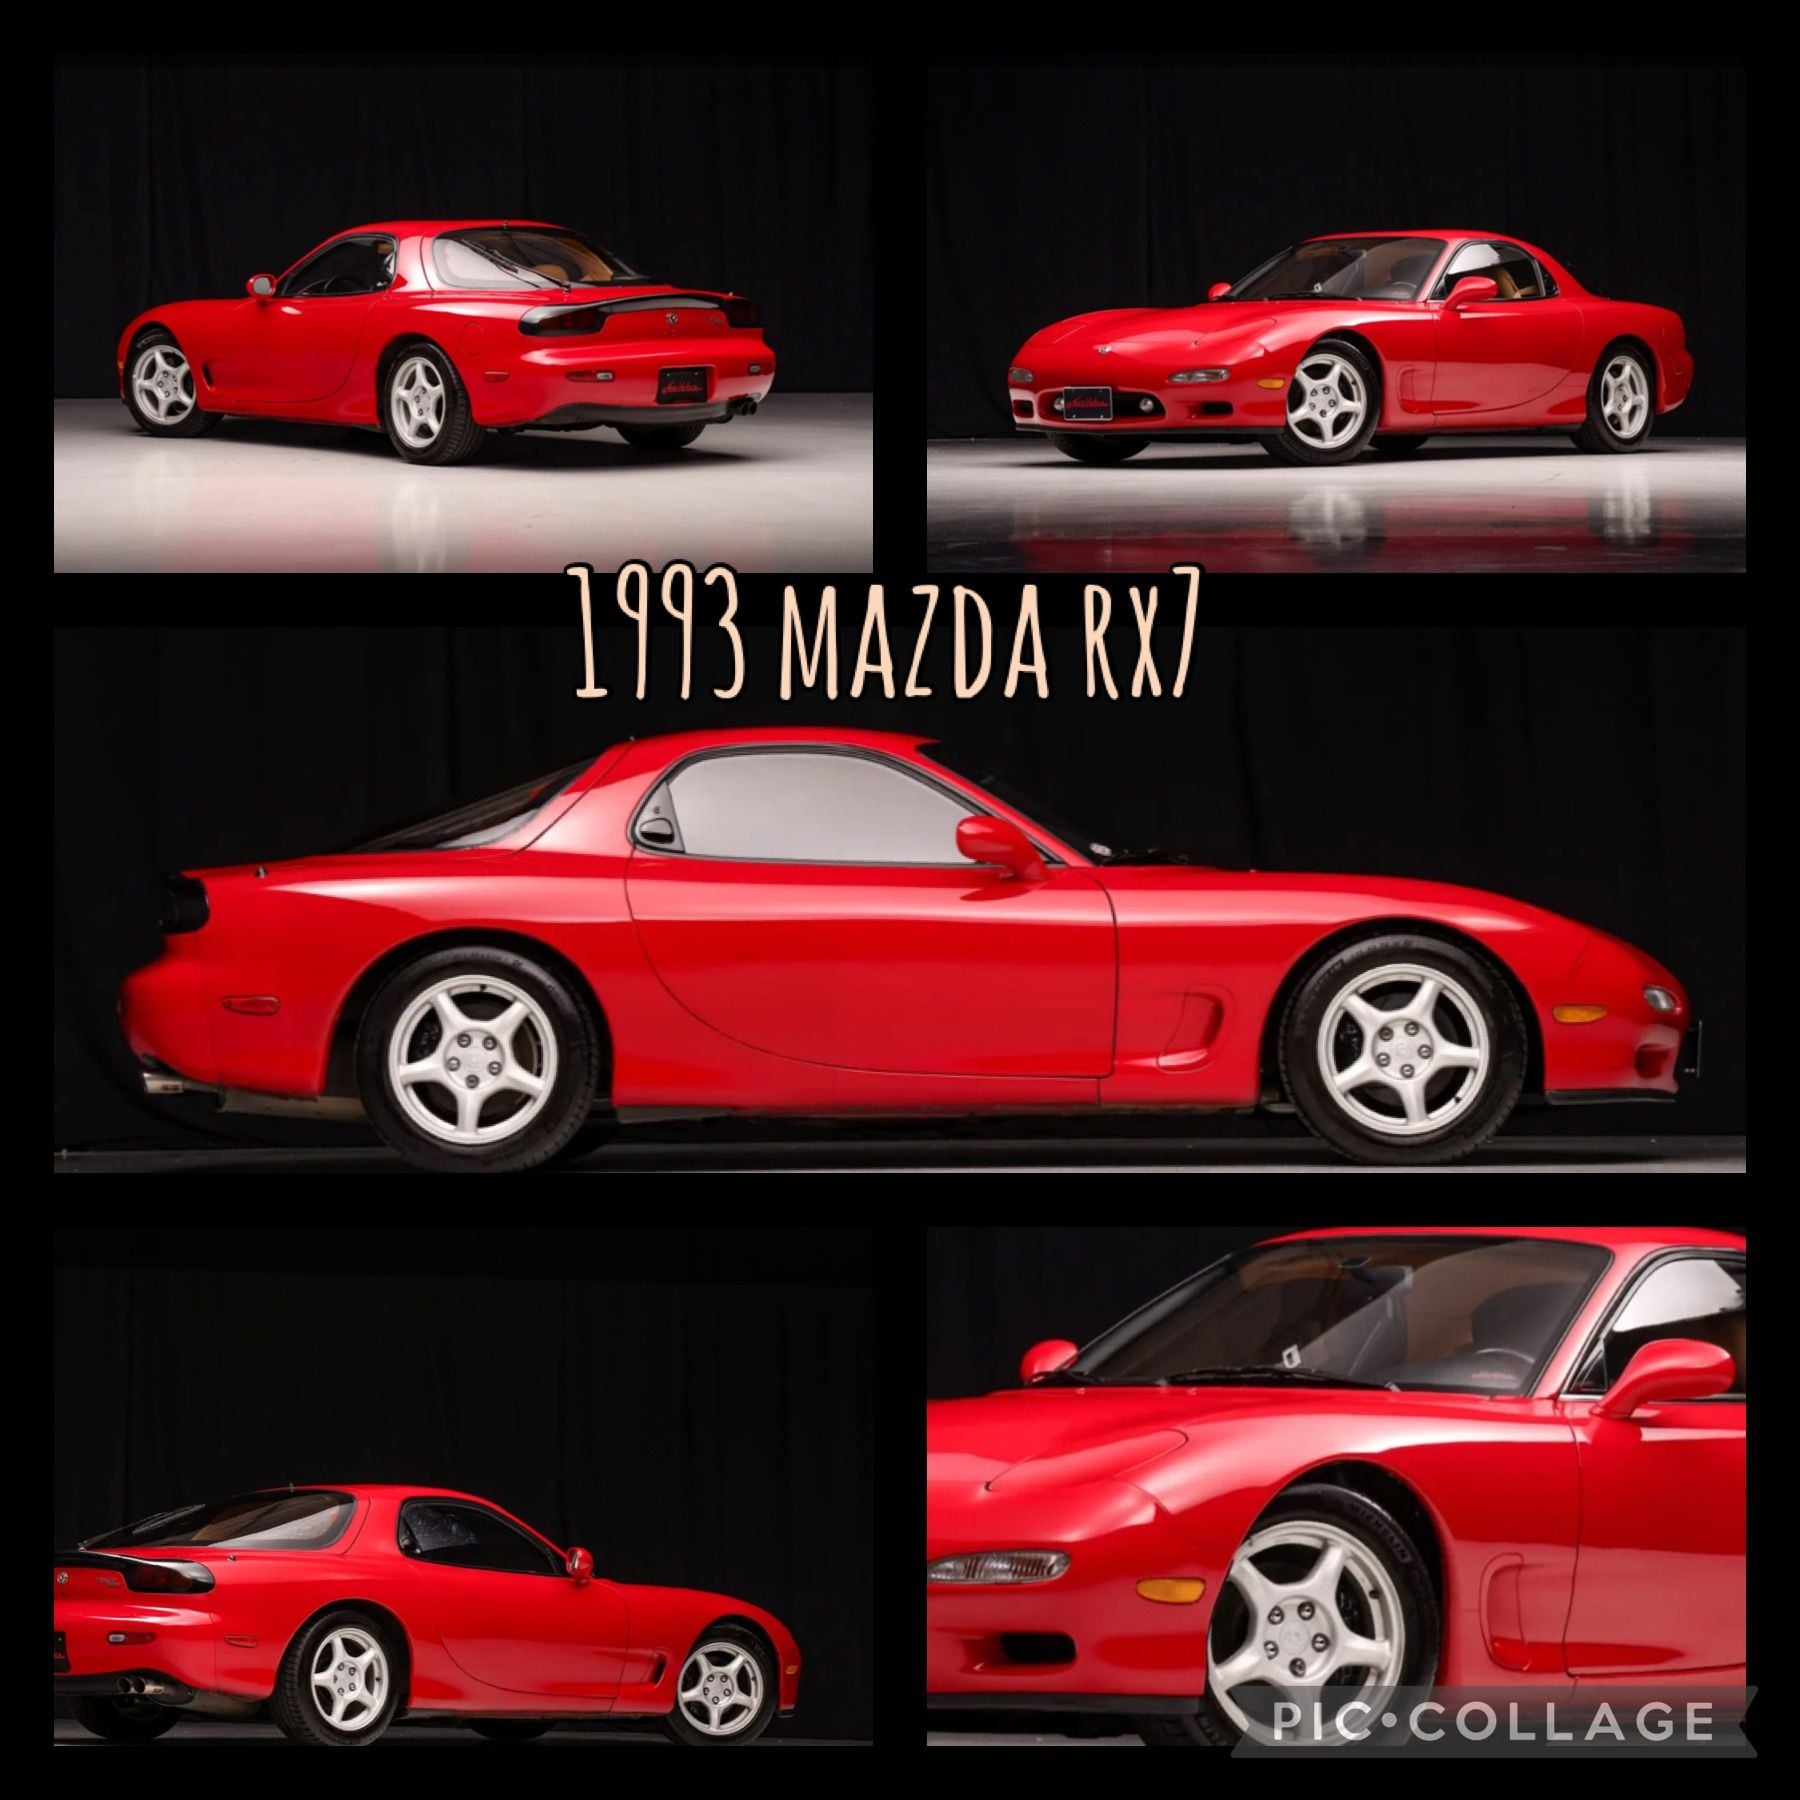 1993 Mazda RX-7 - Clean 1993 RX7 - Used - Long Island, NY 11563, United States